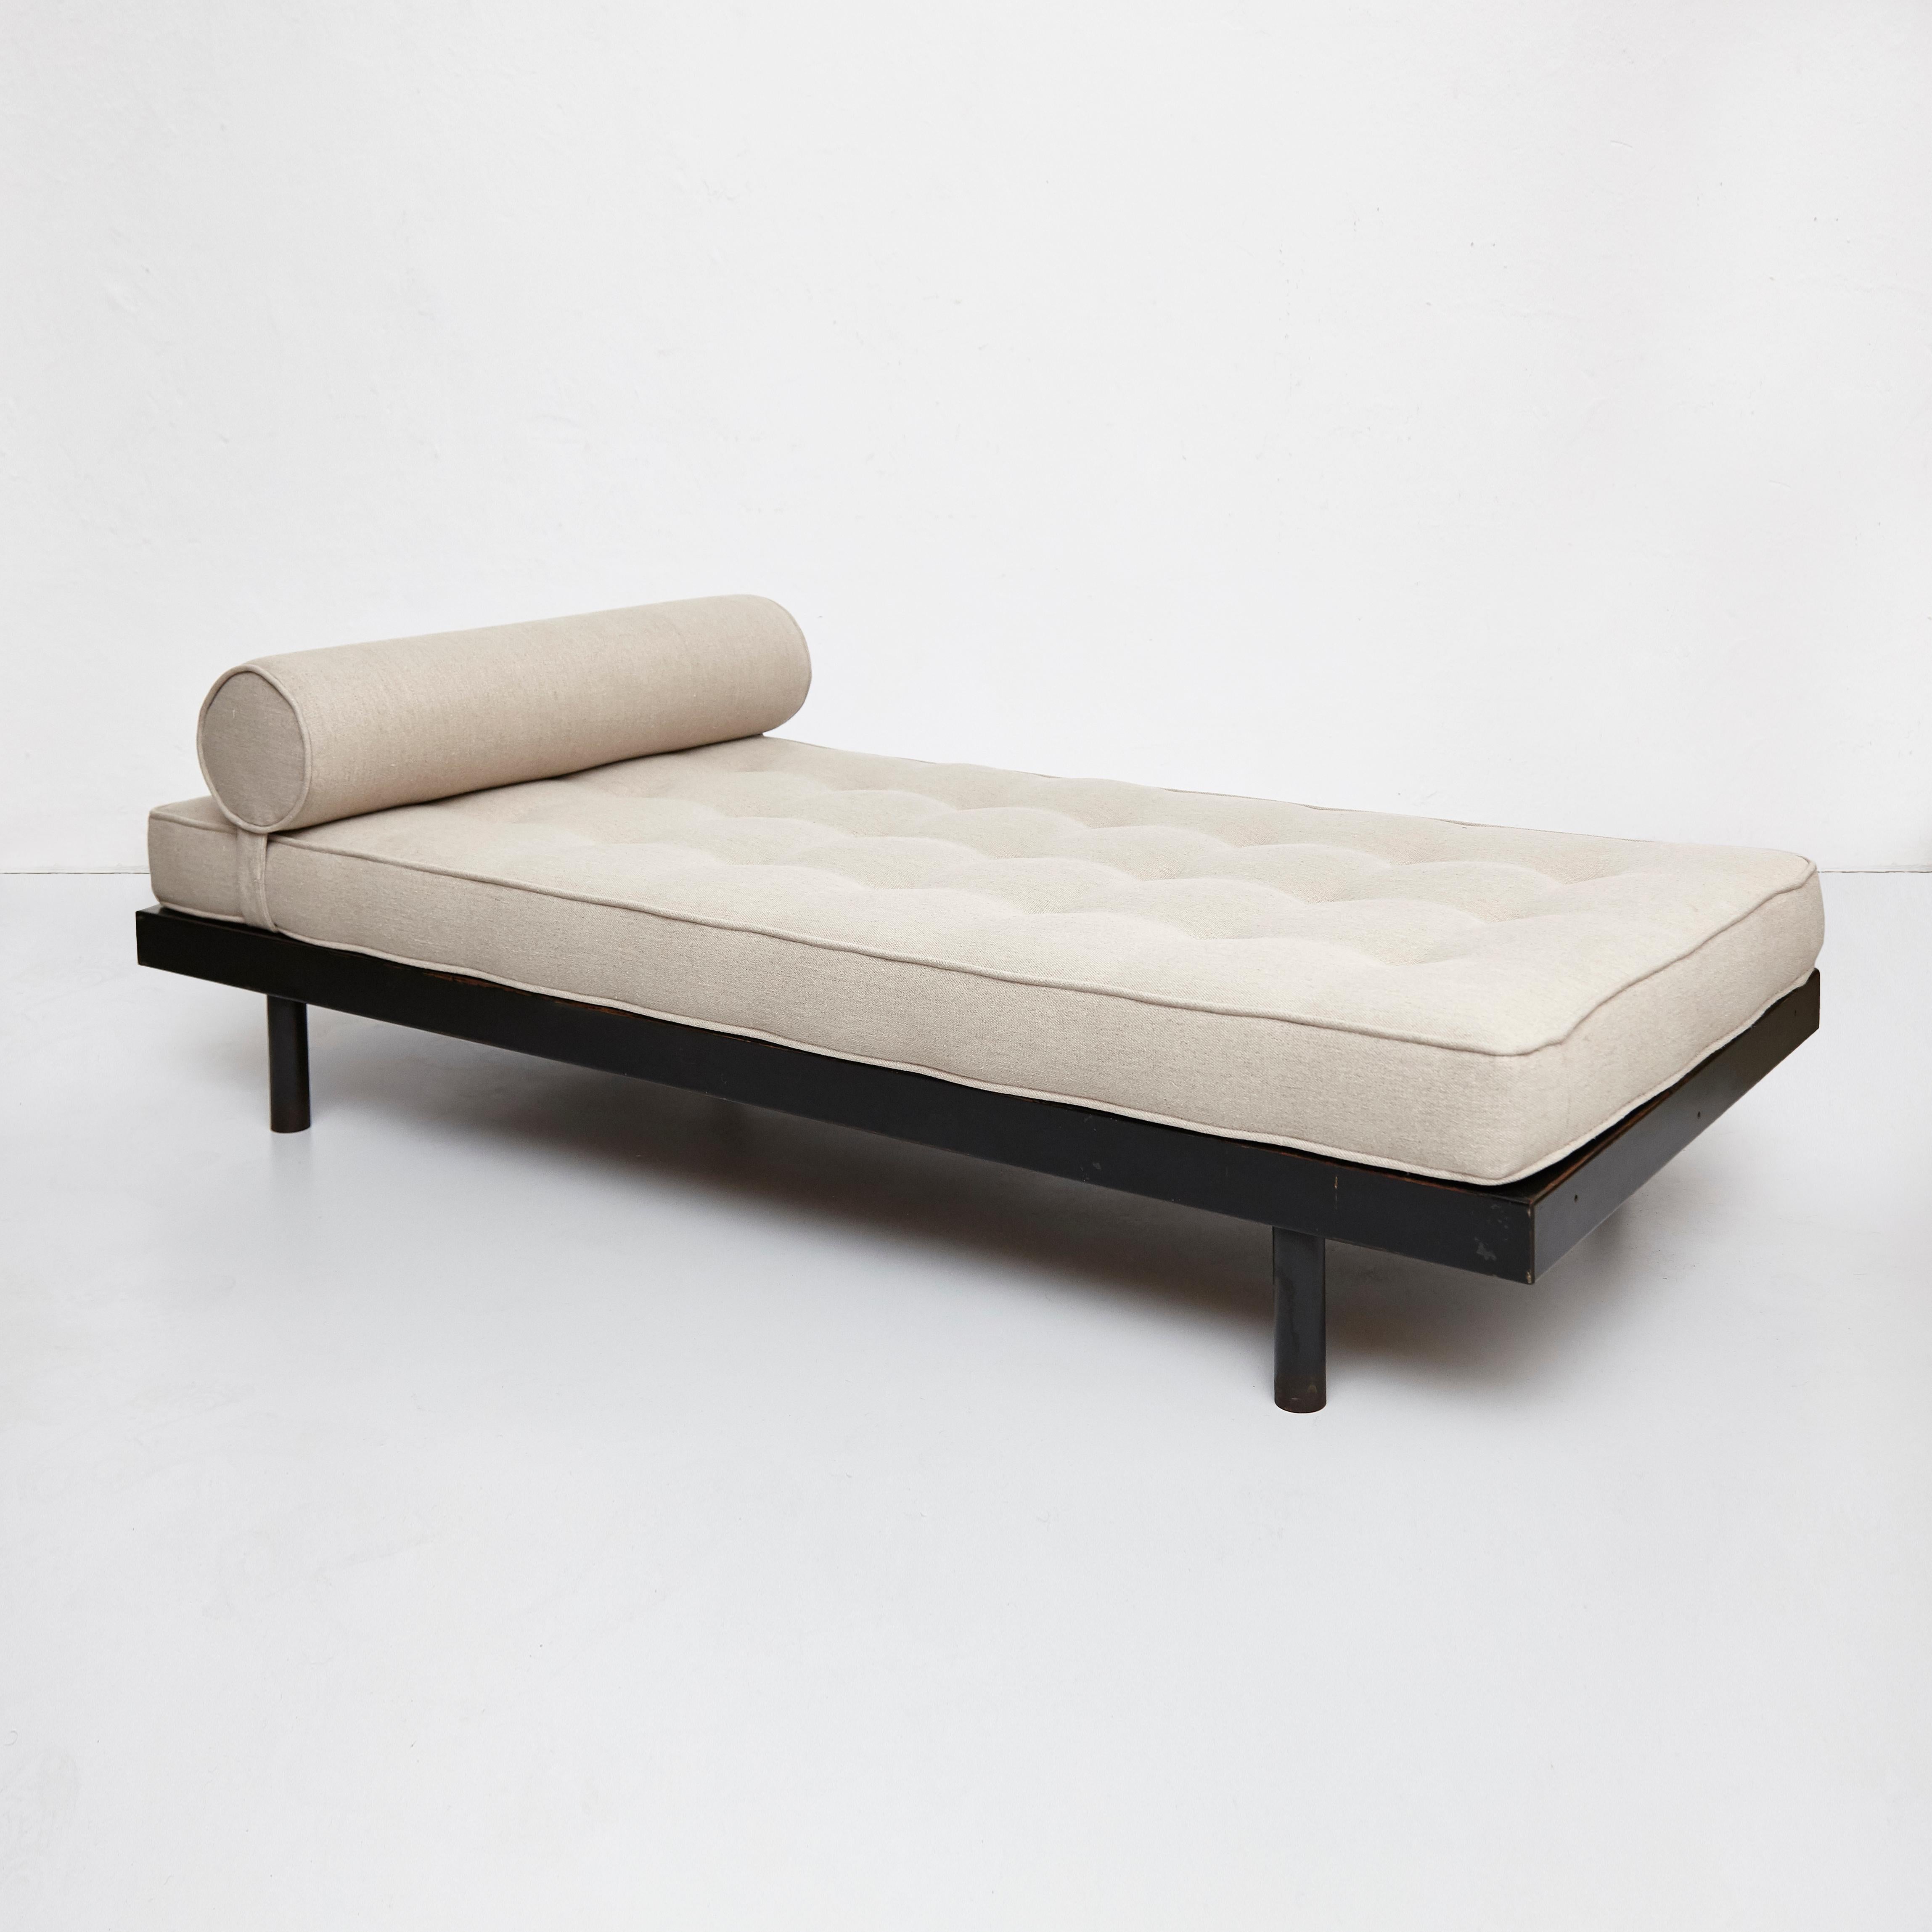 French Jean Prouvé Mid-Century Modern S.C.A.L. Daybed, circa 1950